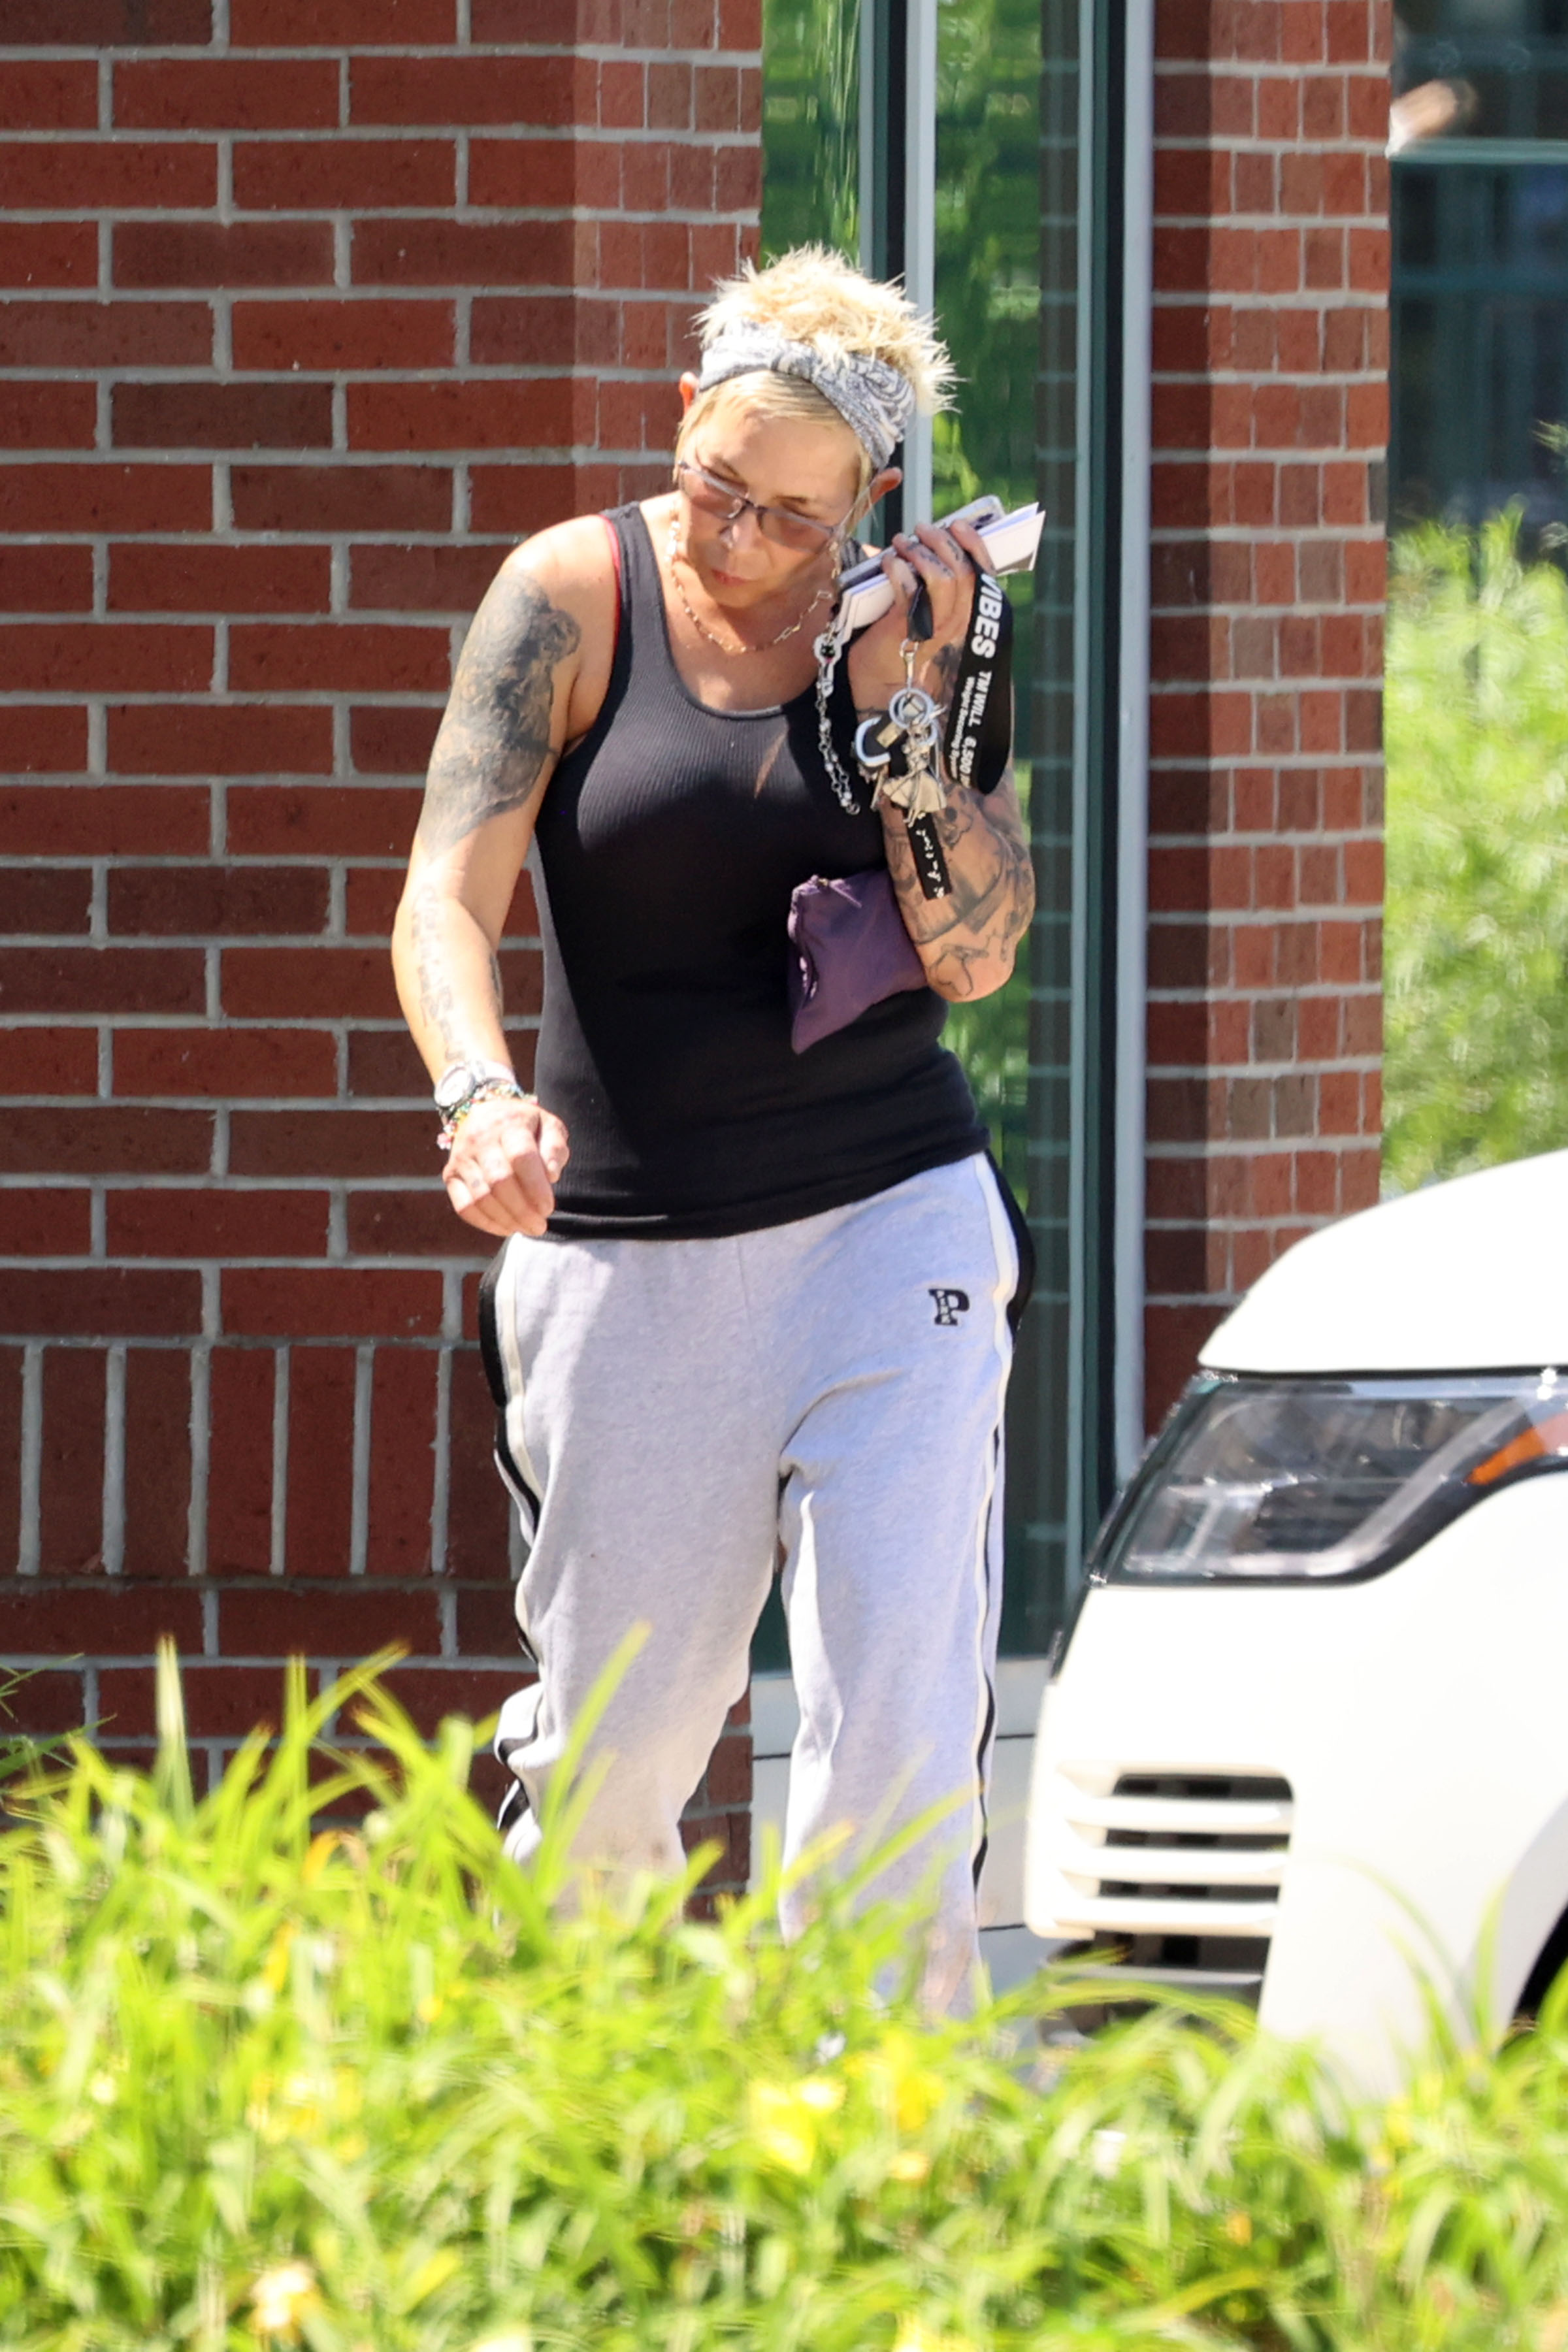 Eminem's ex was dressed casually in a pair of gray sweat pants and a black vest